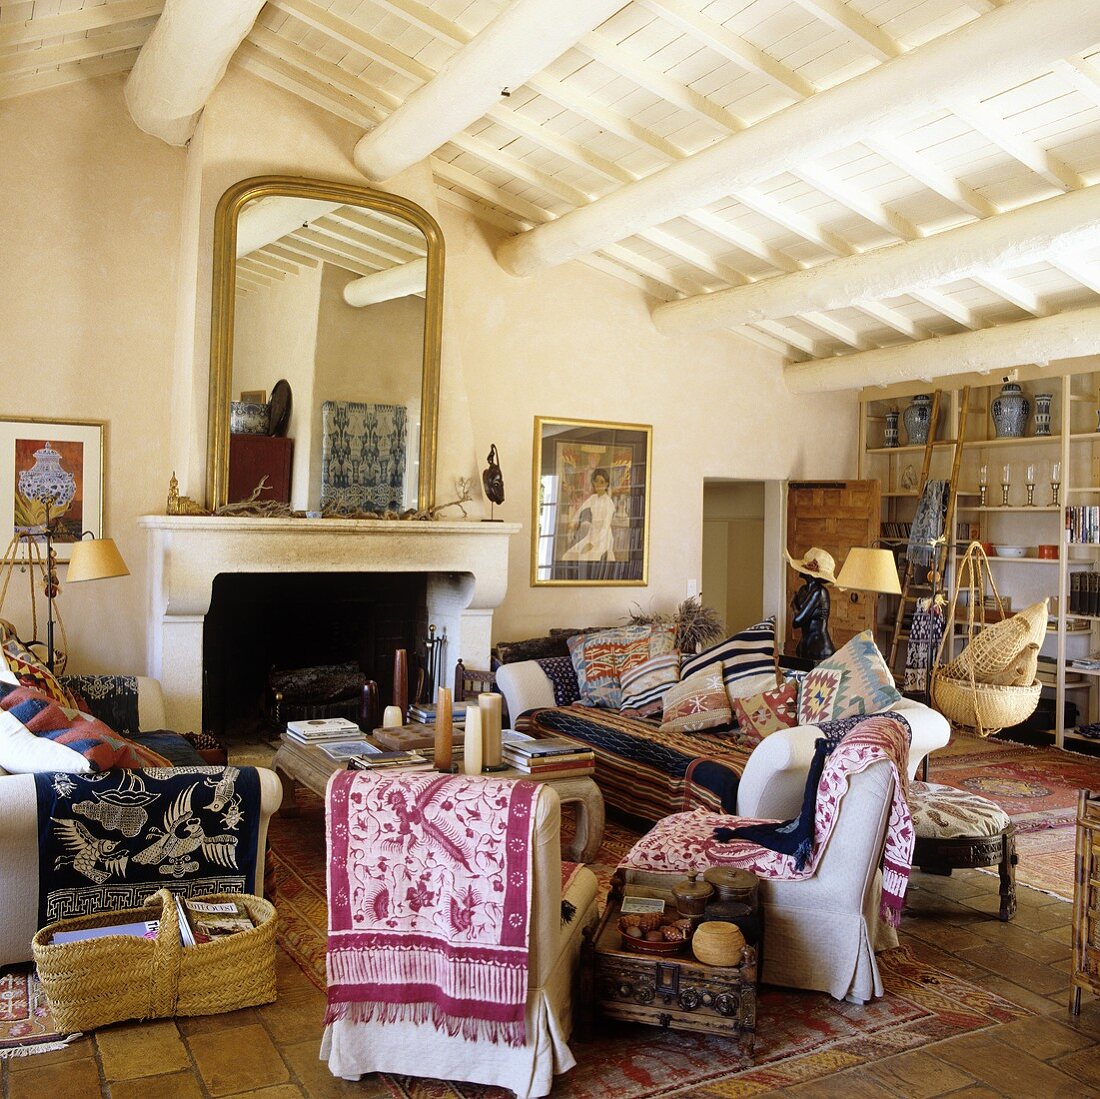 Ethnic throws on a sofa in a Mediterranean living room with a rustic wood beam ceiling